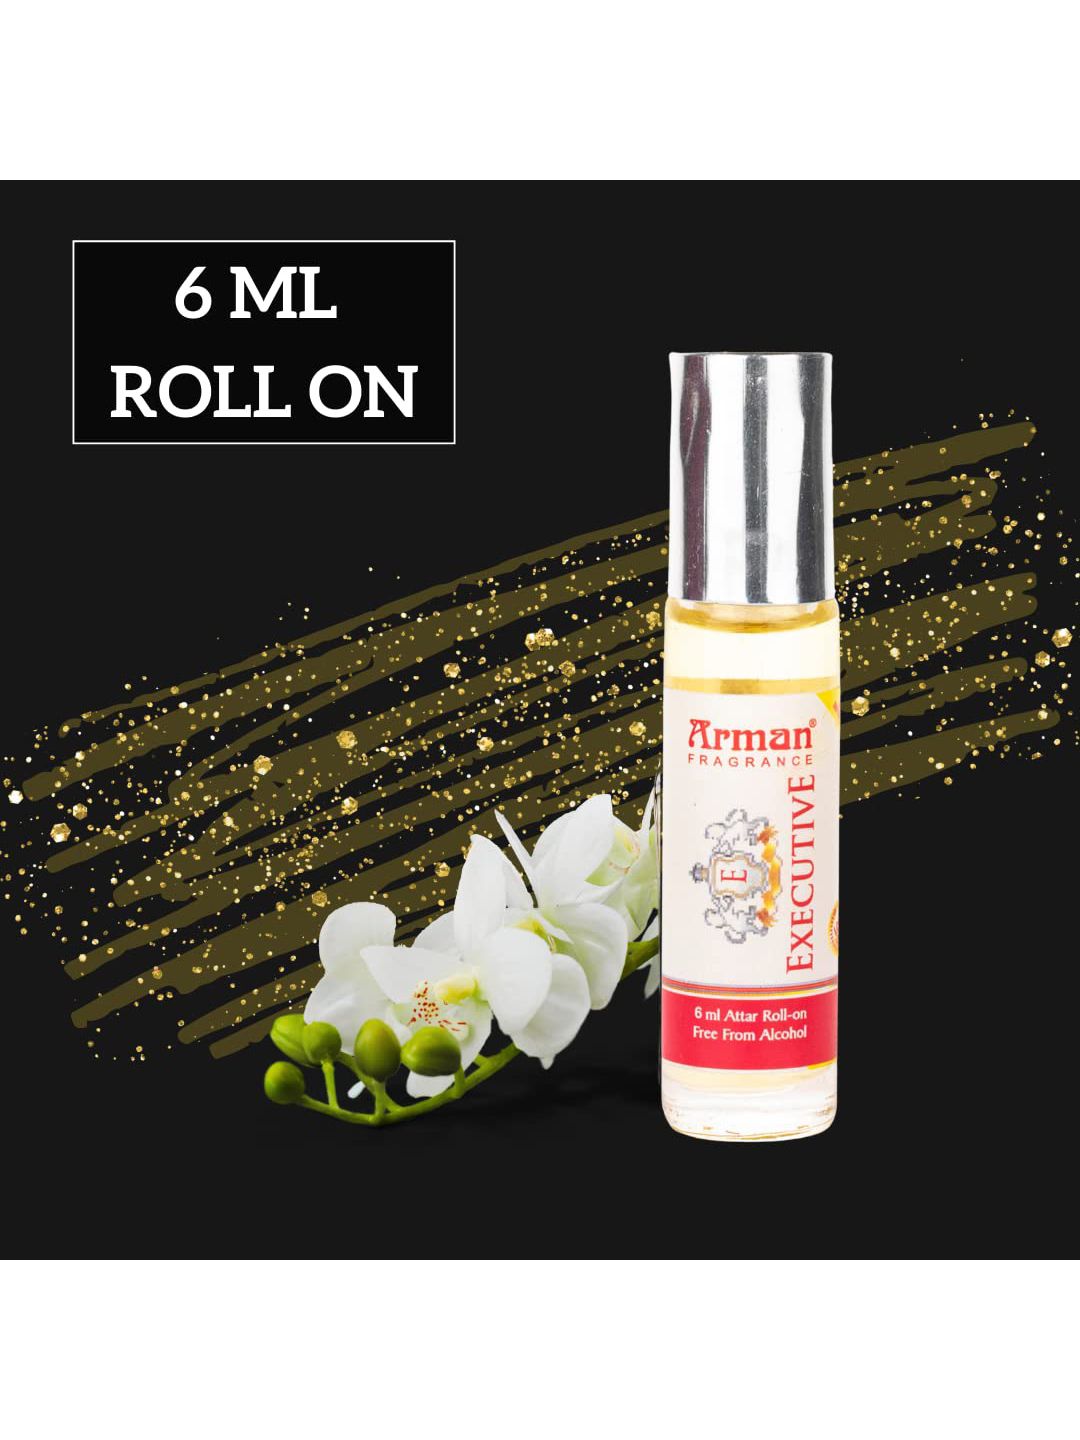 Arman Long Lasting Executive Alcohol Free Attar Roll On - 6 ml Price in India